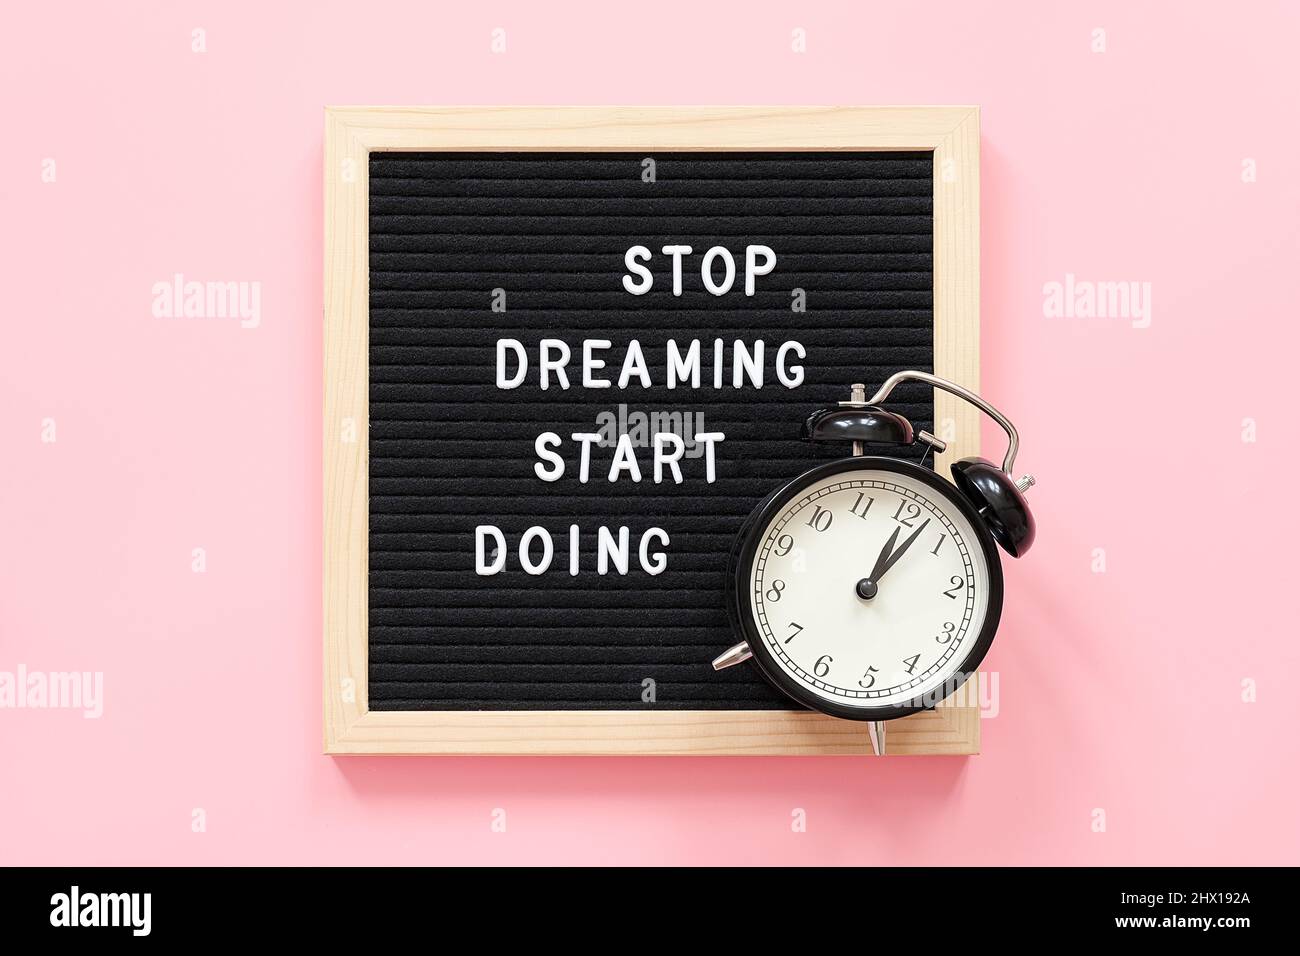 Stop Dreaming Start Doing. Motivational quote on frame letter board and black alarm clock on pink background. Top view Flat lay Concept inspirational Stock Photo